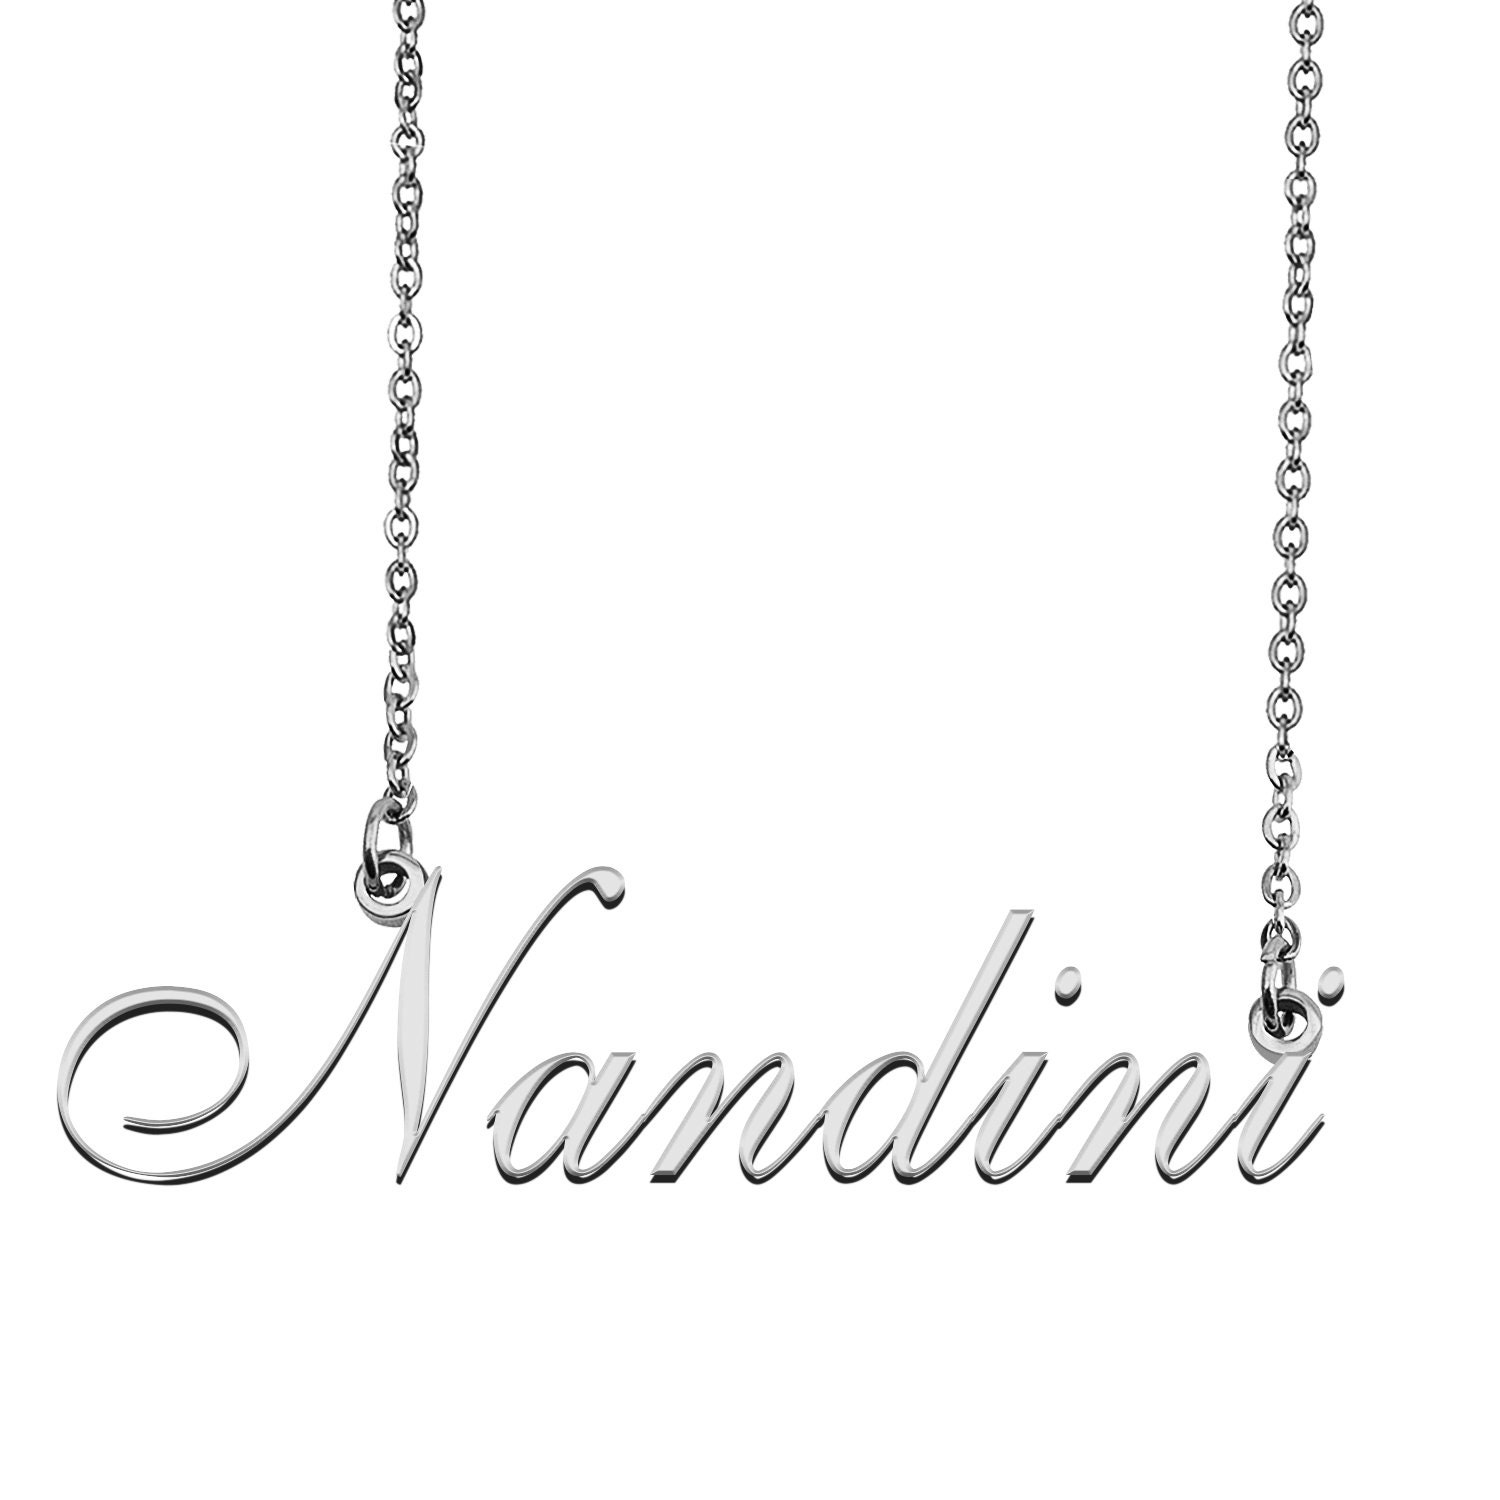 Nandini Name Necklace Mother Day Christmas Gift Birthday Party Wedding Bride Maid Bridal Silver Gold Rose